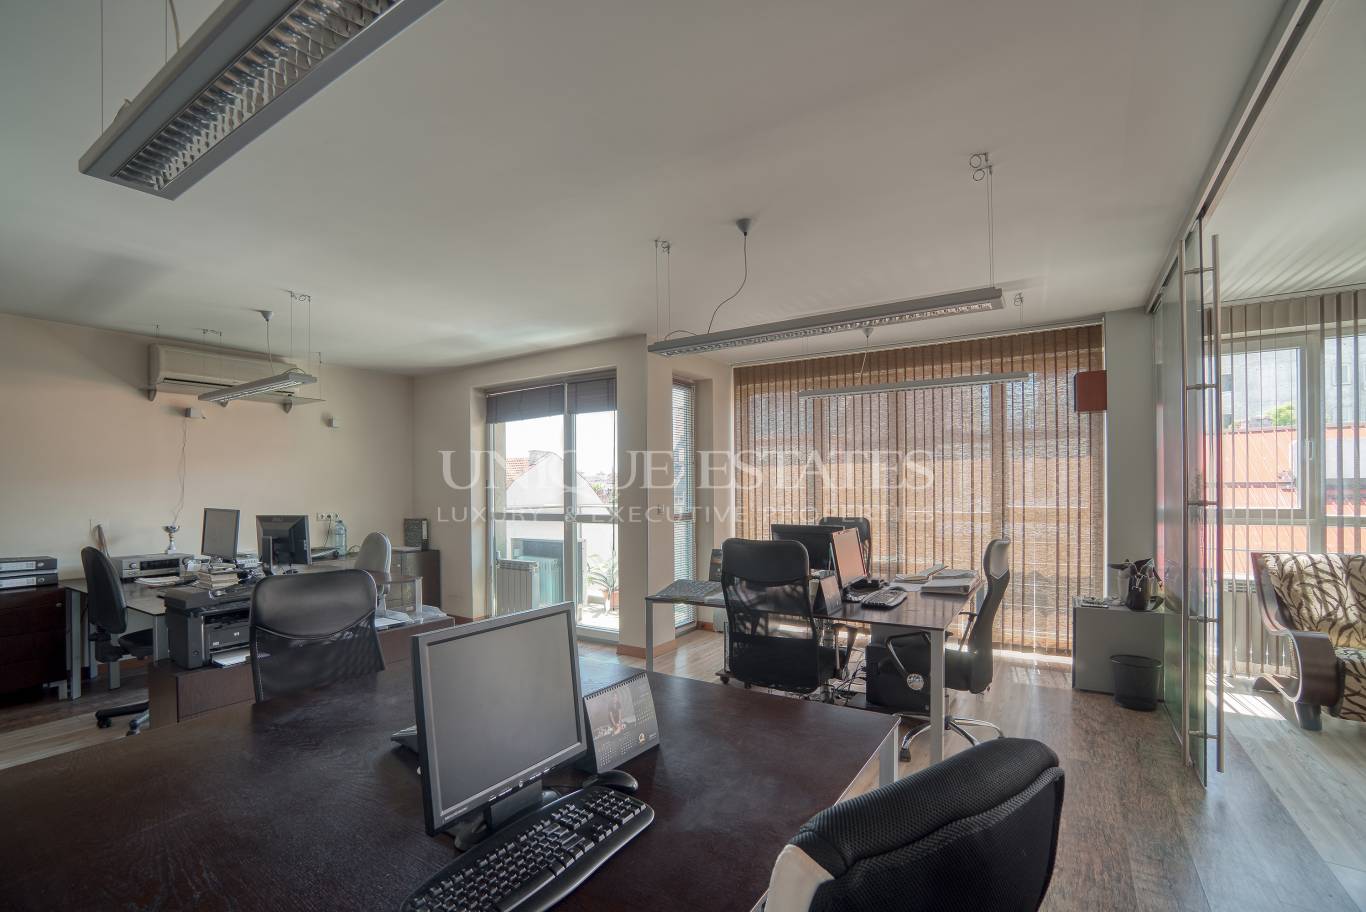 Office for rent in Sofia, Downtown with listing ID: K19190 - image 7